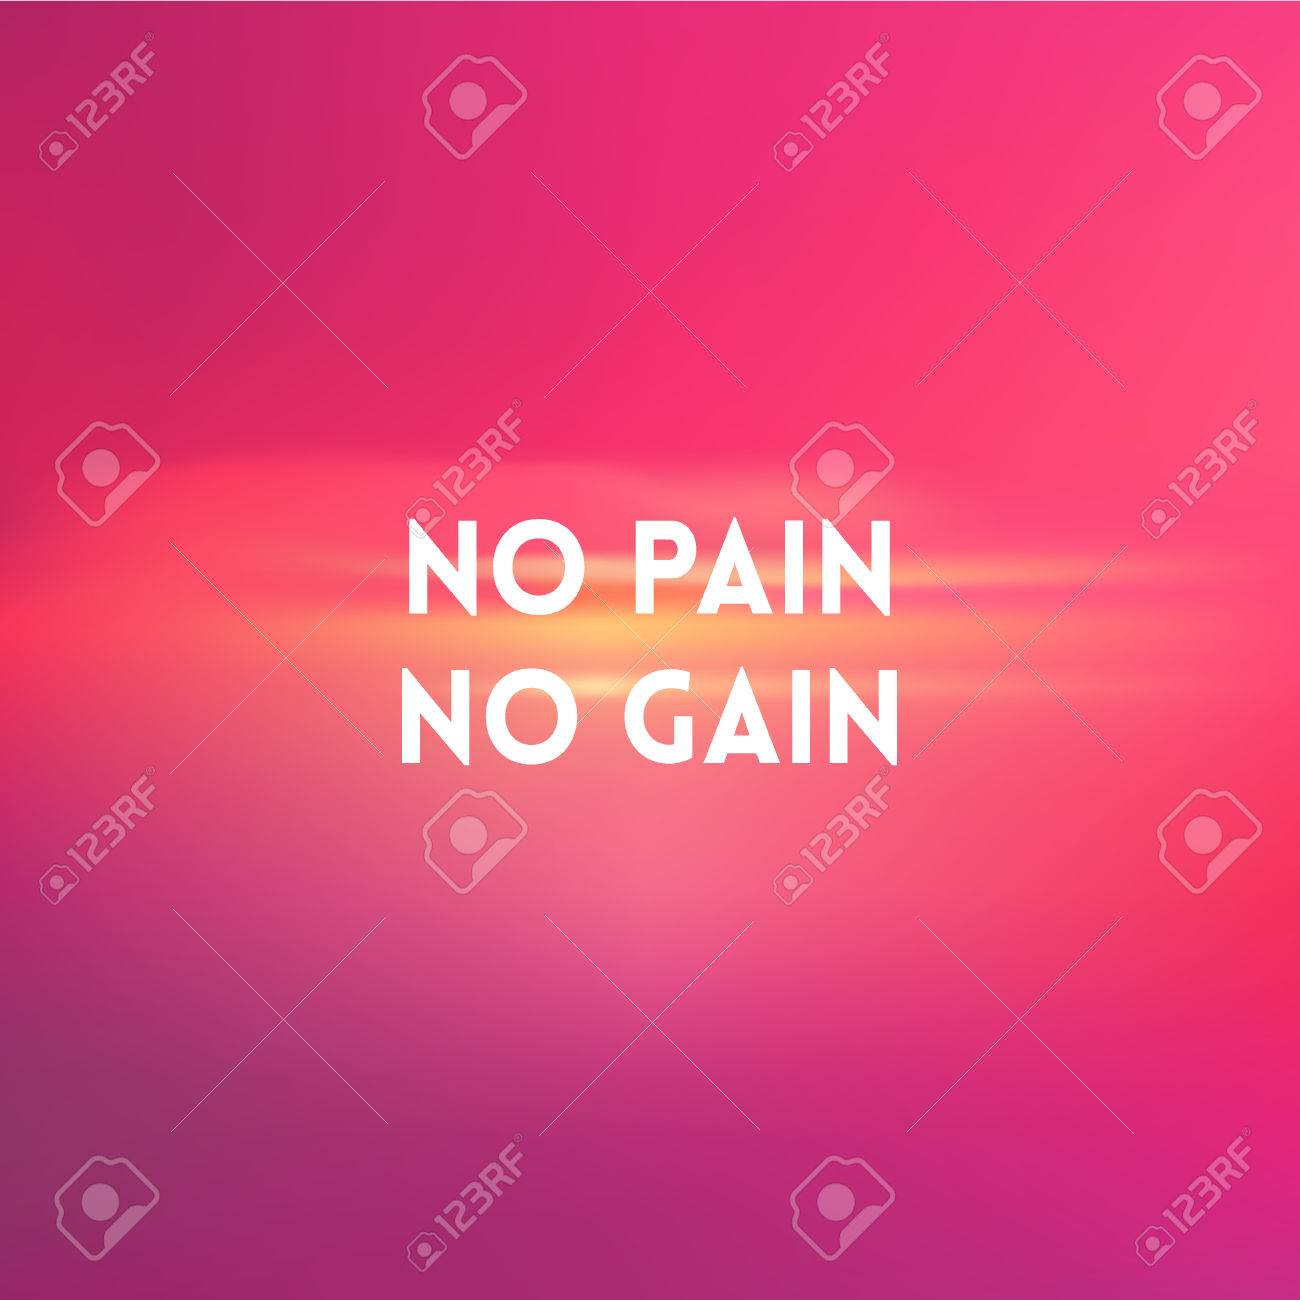 Square Blurred Background Sunset Colors With Love Quote No